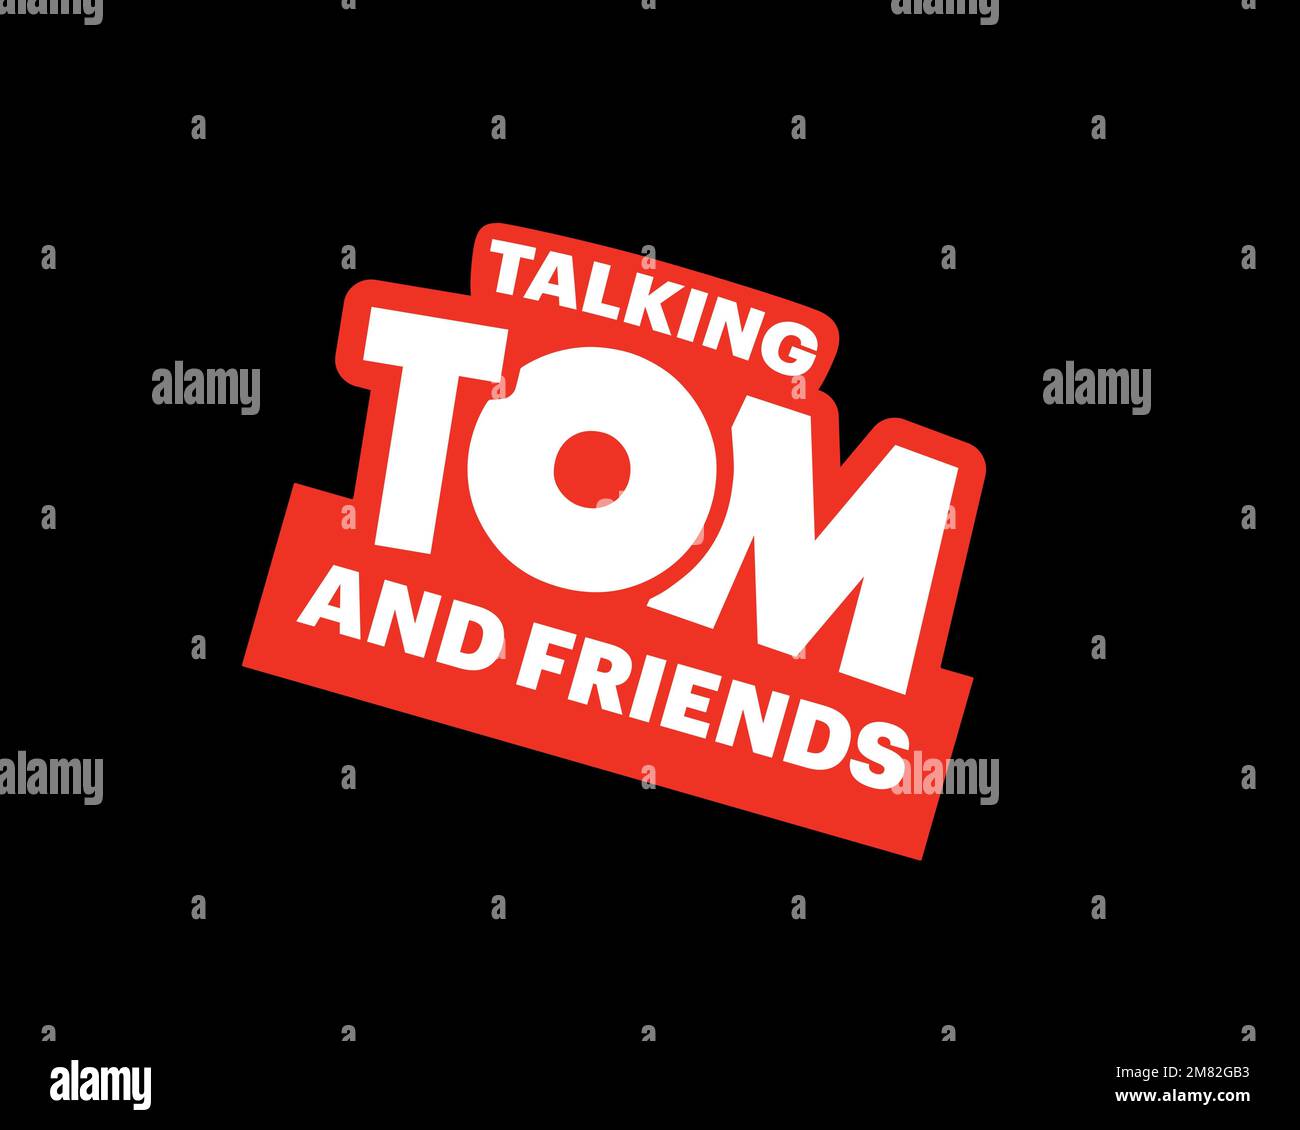 Talking Tom and Friends, rotated logo, black background B Stock Photo -  Alamy